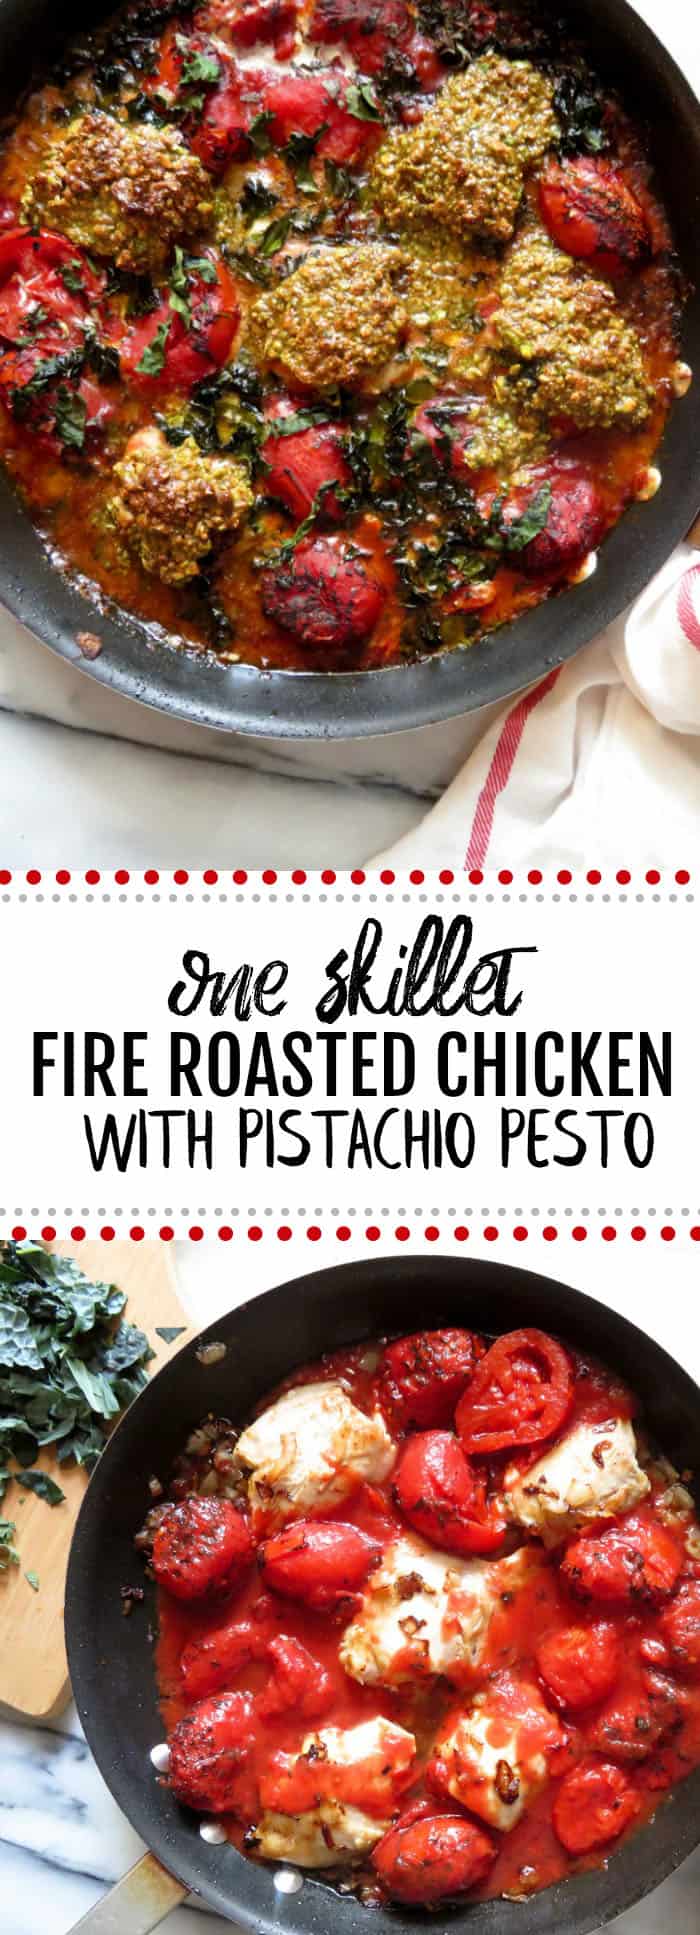 You'll love this easy One Skillet Fire Roasted Tomato Chicken! It's the perfect flavorful dish for any day of the week! Yummy low carb + gluten free recipe! thetoastedpinenut.com #lowcarb #glutenfree #oneskillet #dinner